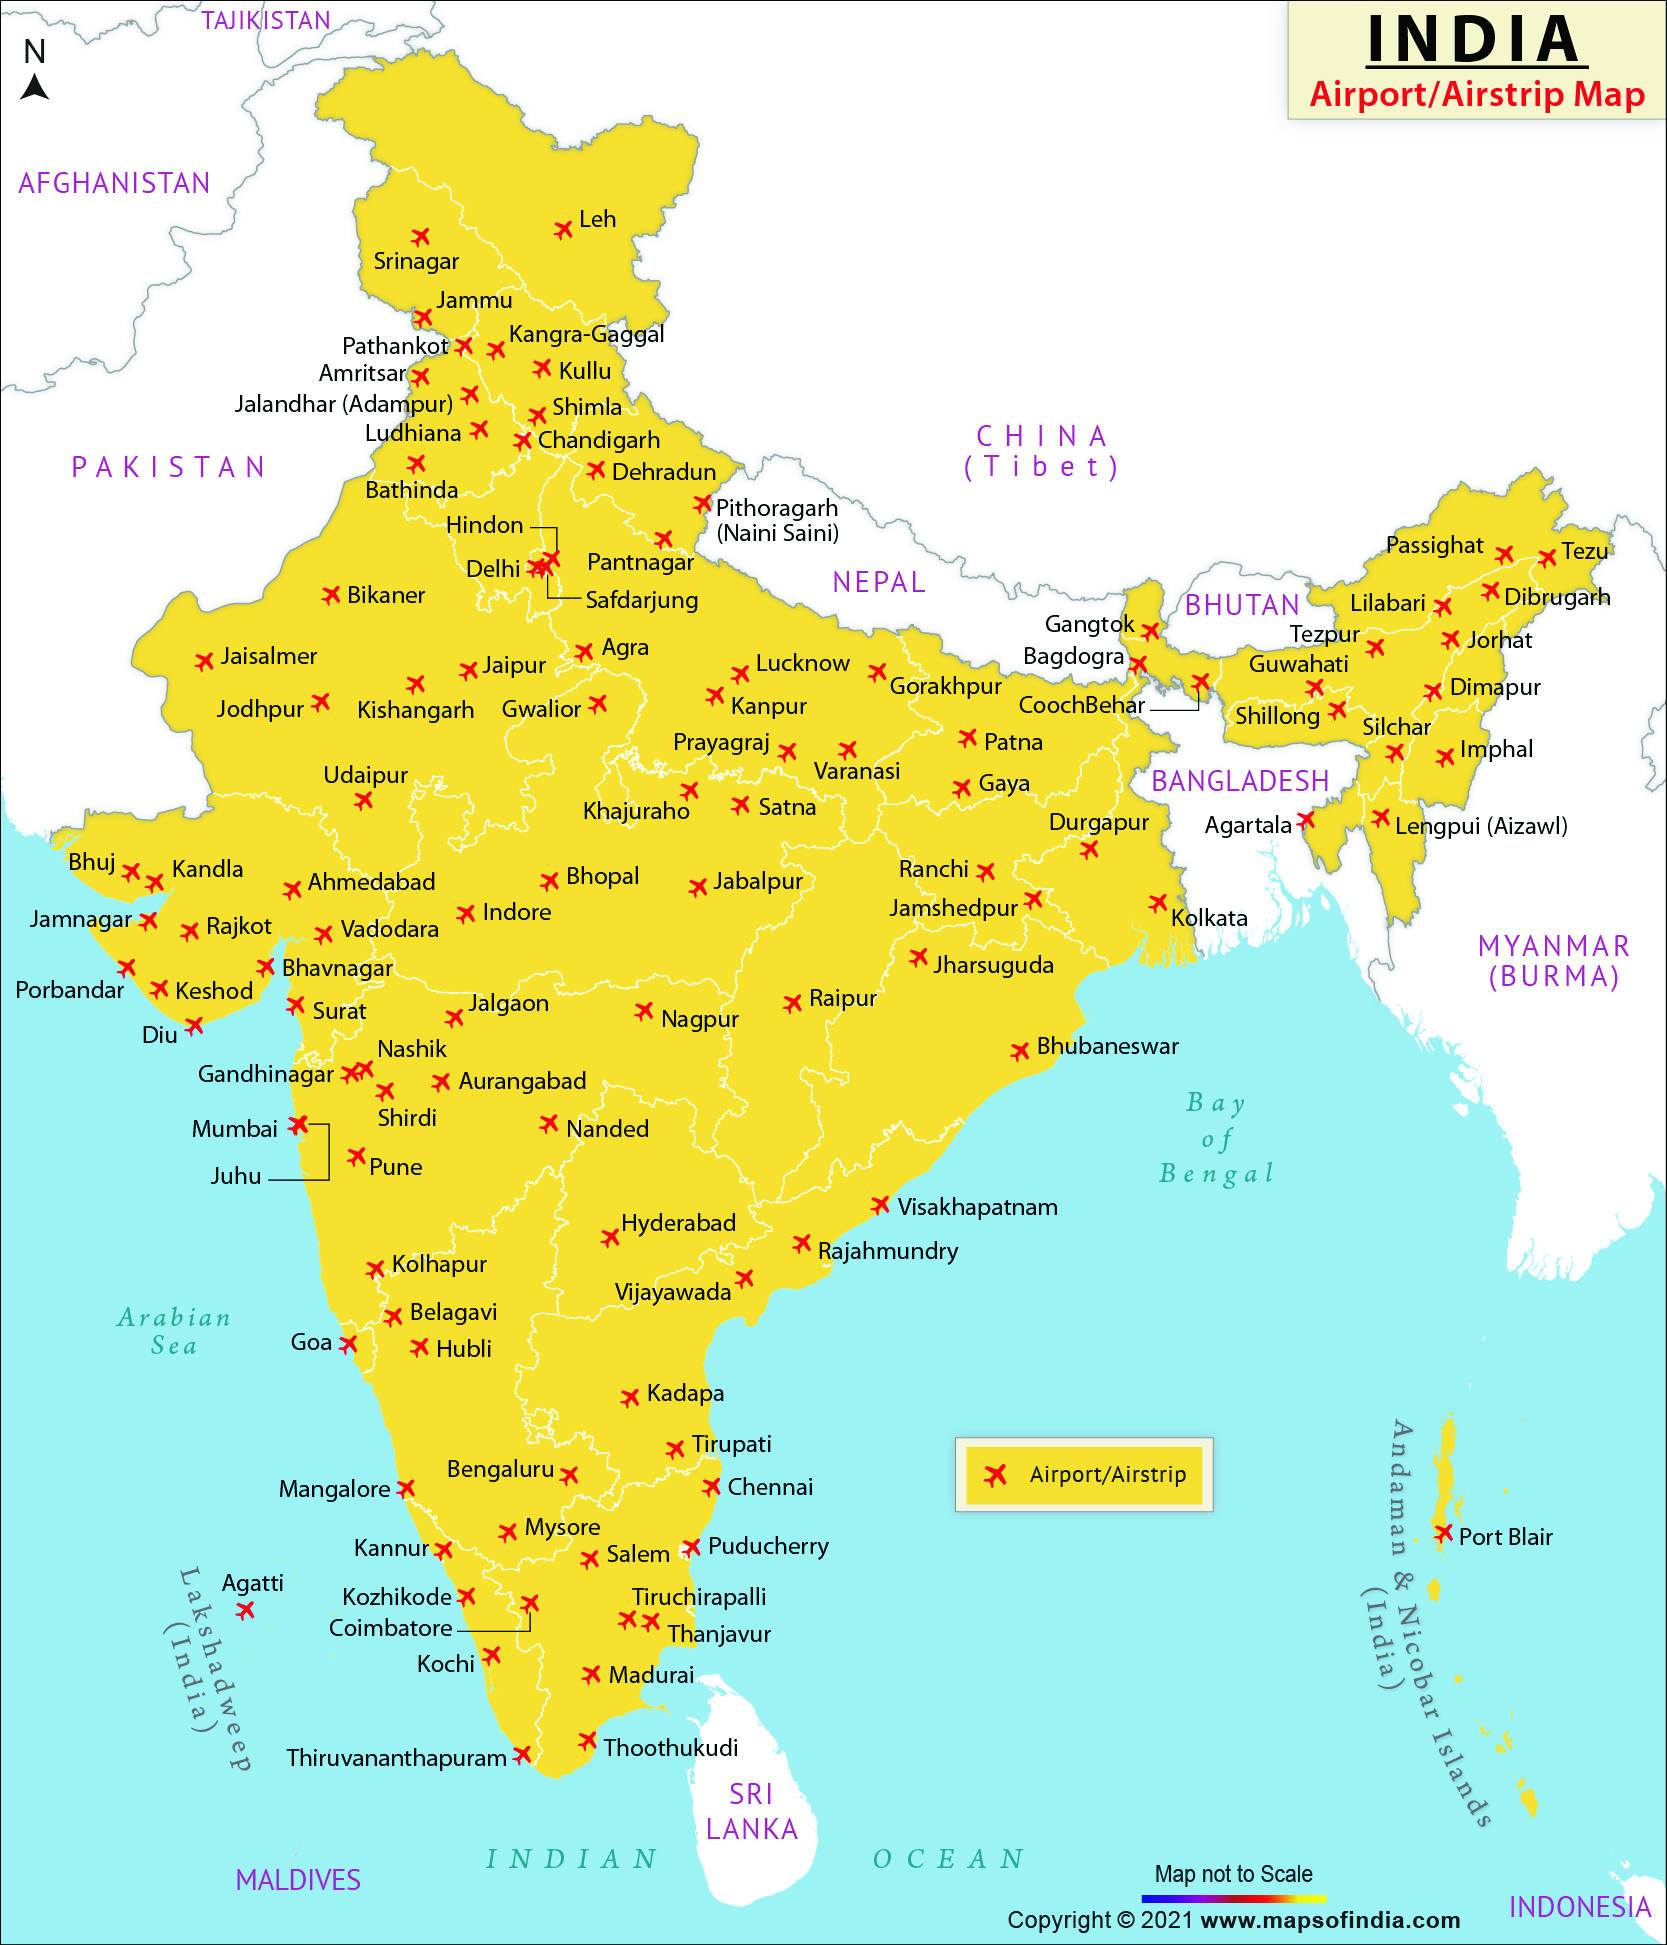 Major Airports in India